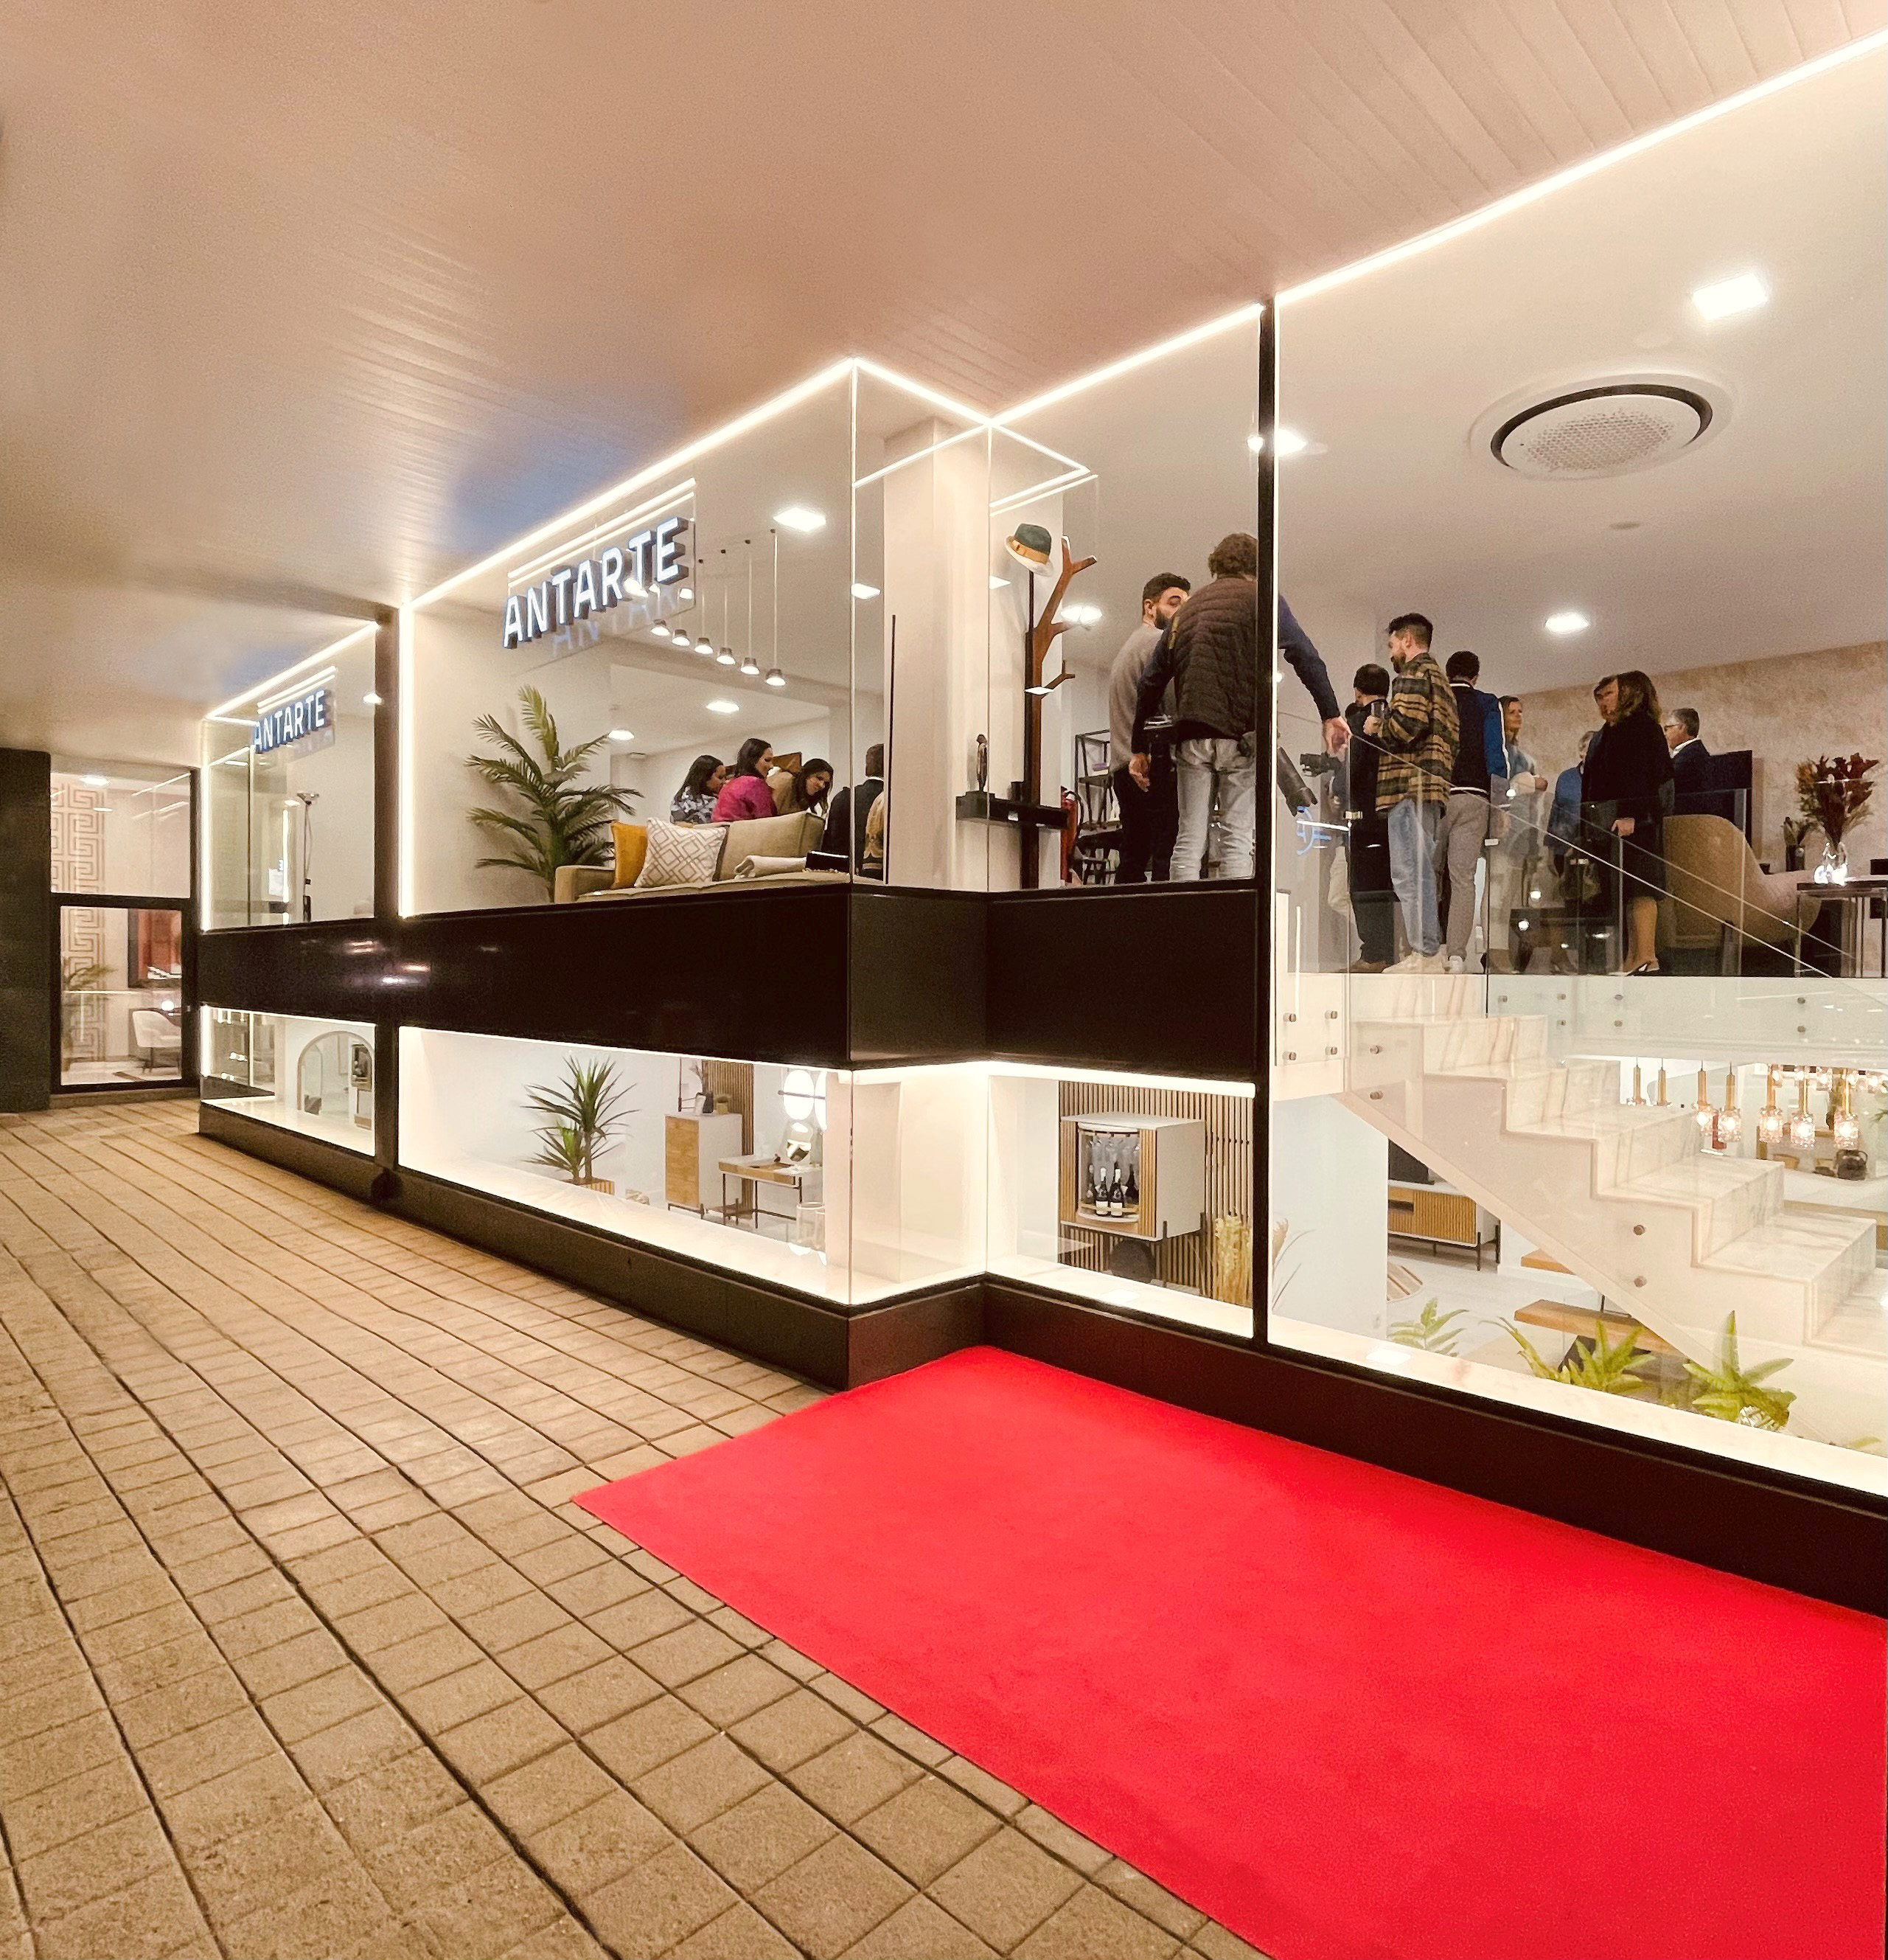 Antarte Boutique Store, the new Oporto store in the heart of Foz